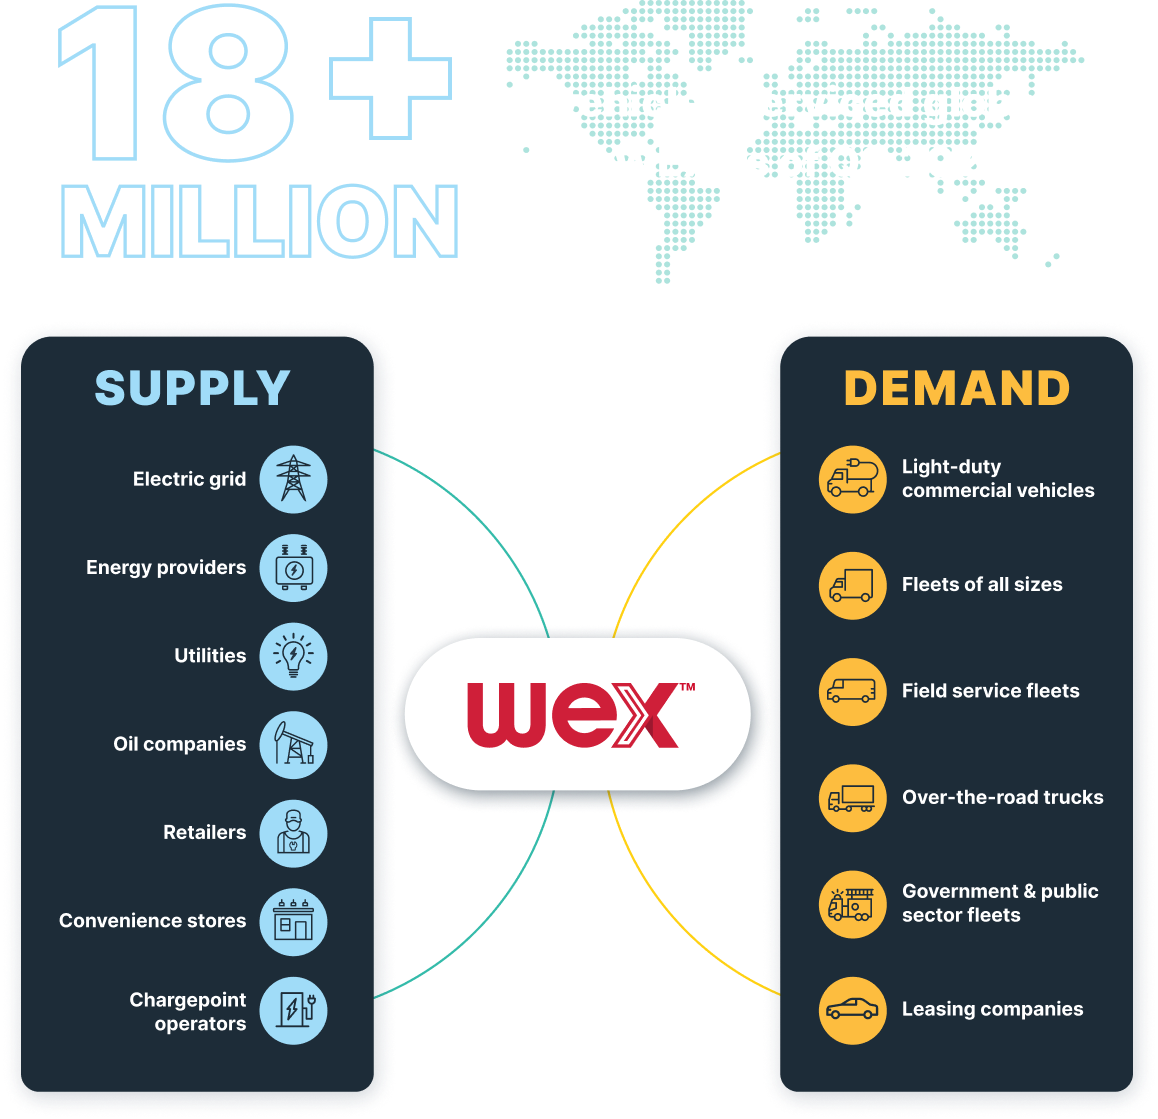 18+ million vehicles serviced globally by WEX as of Q2 2023